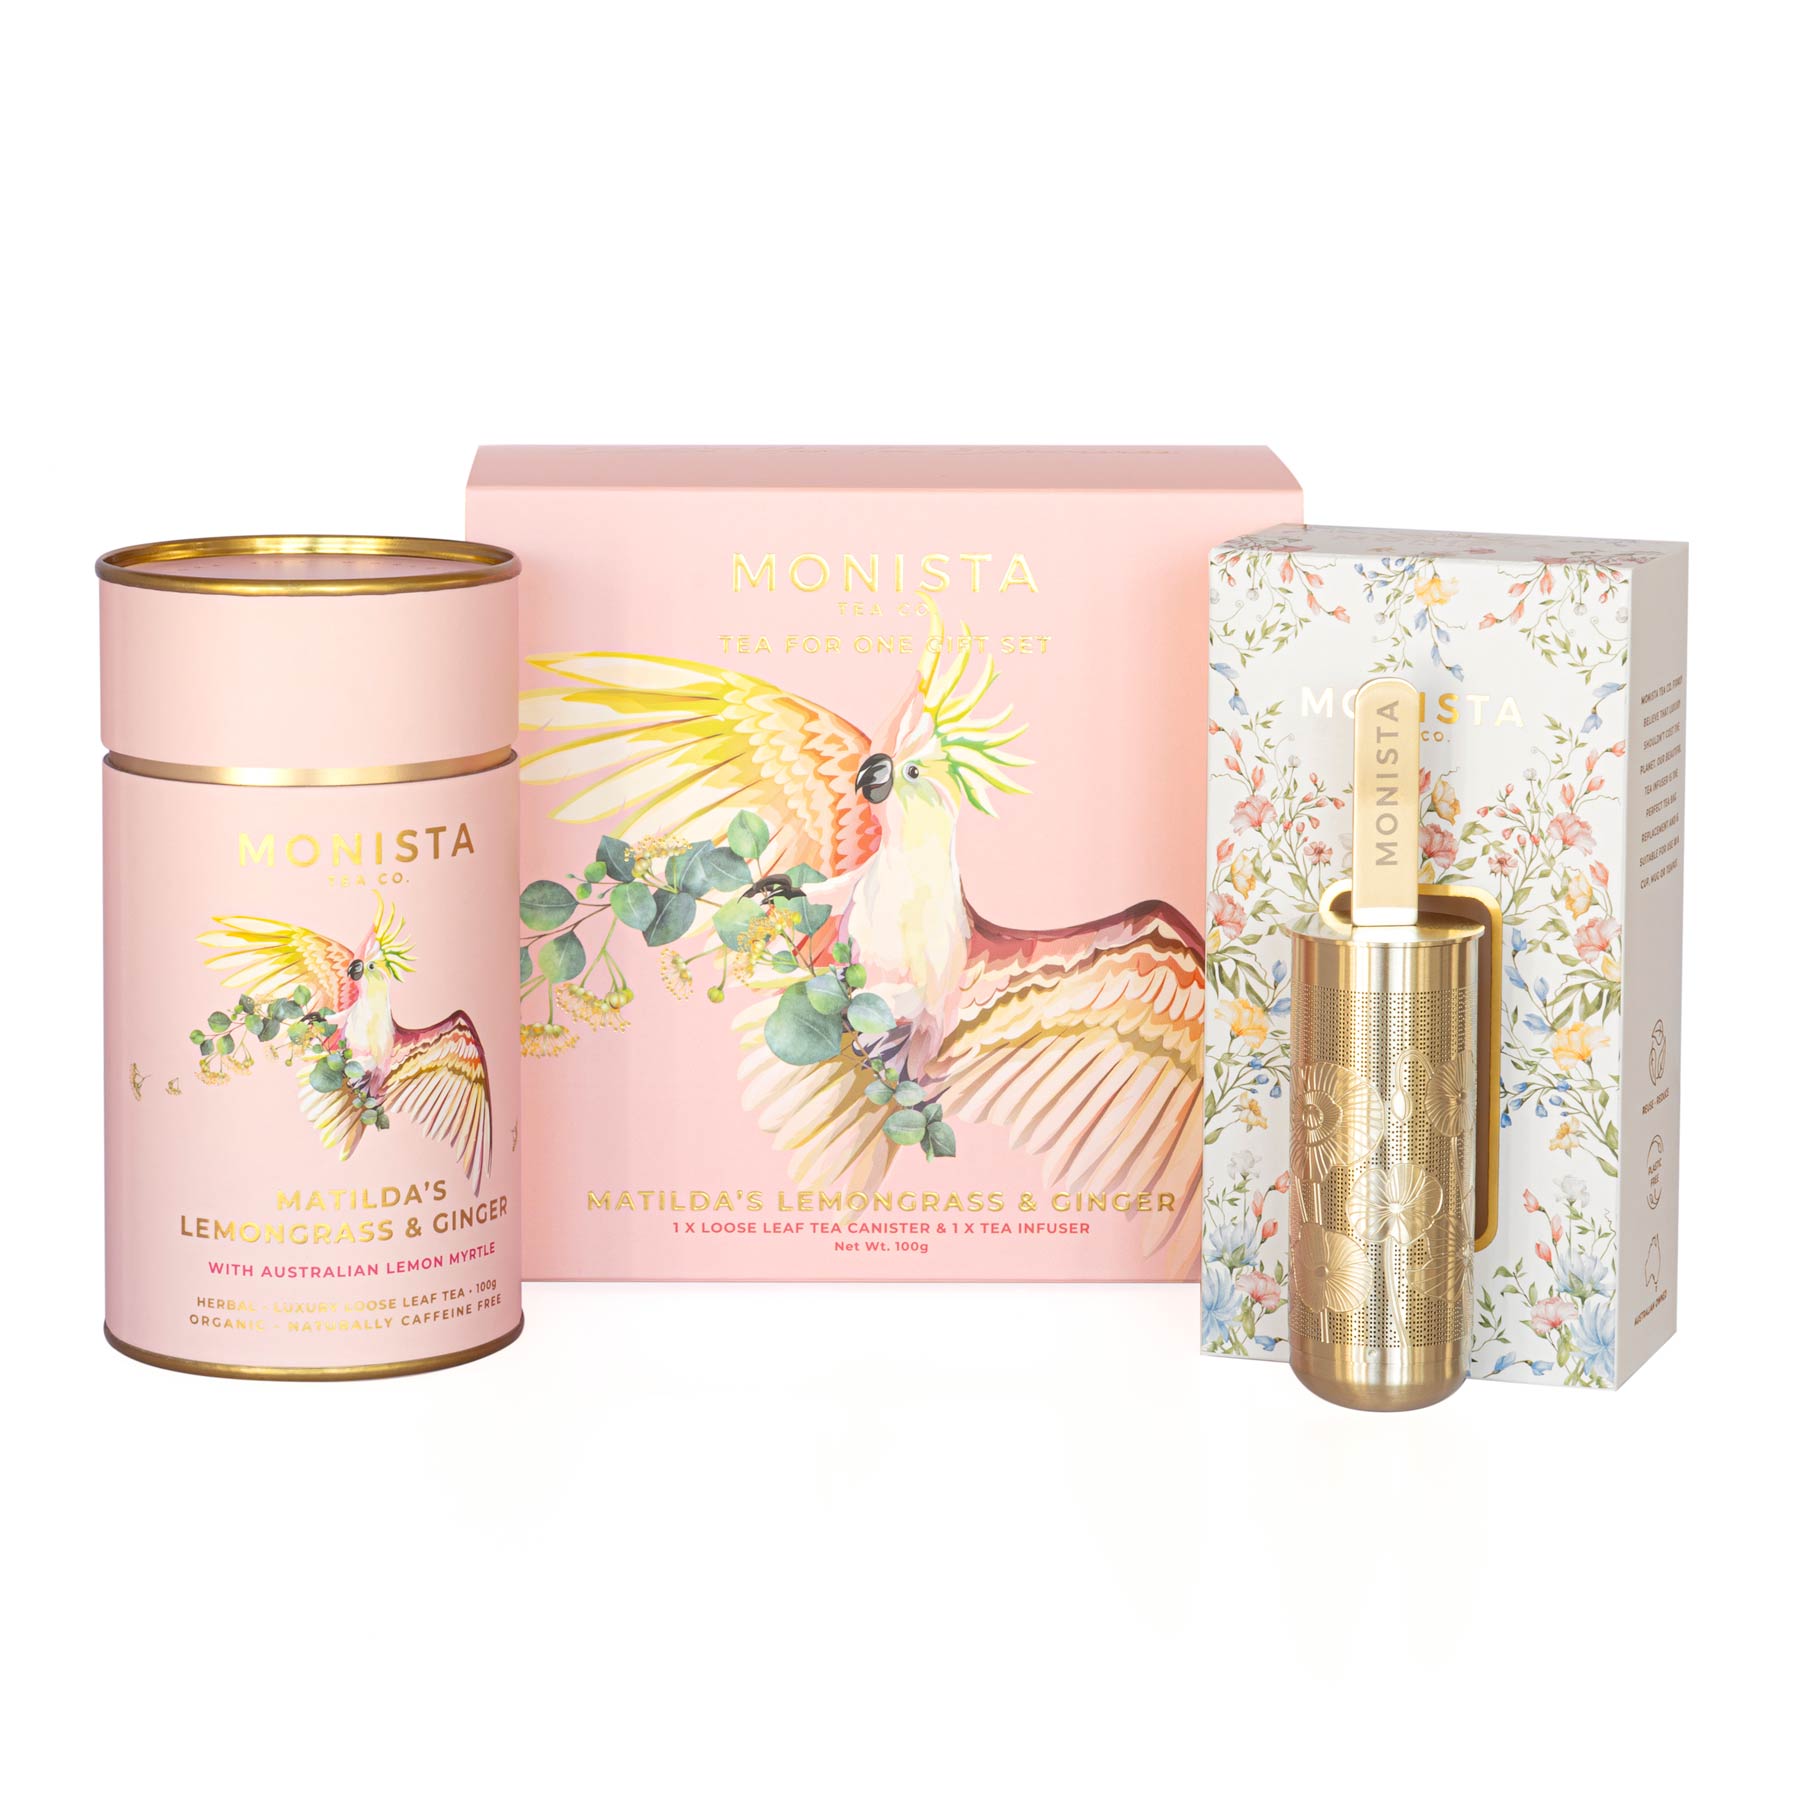 tea gift set with pretty pink canister and tea infuser